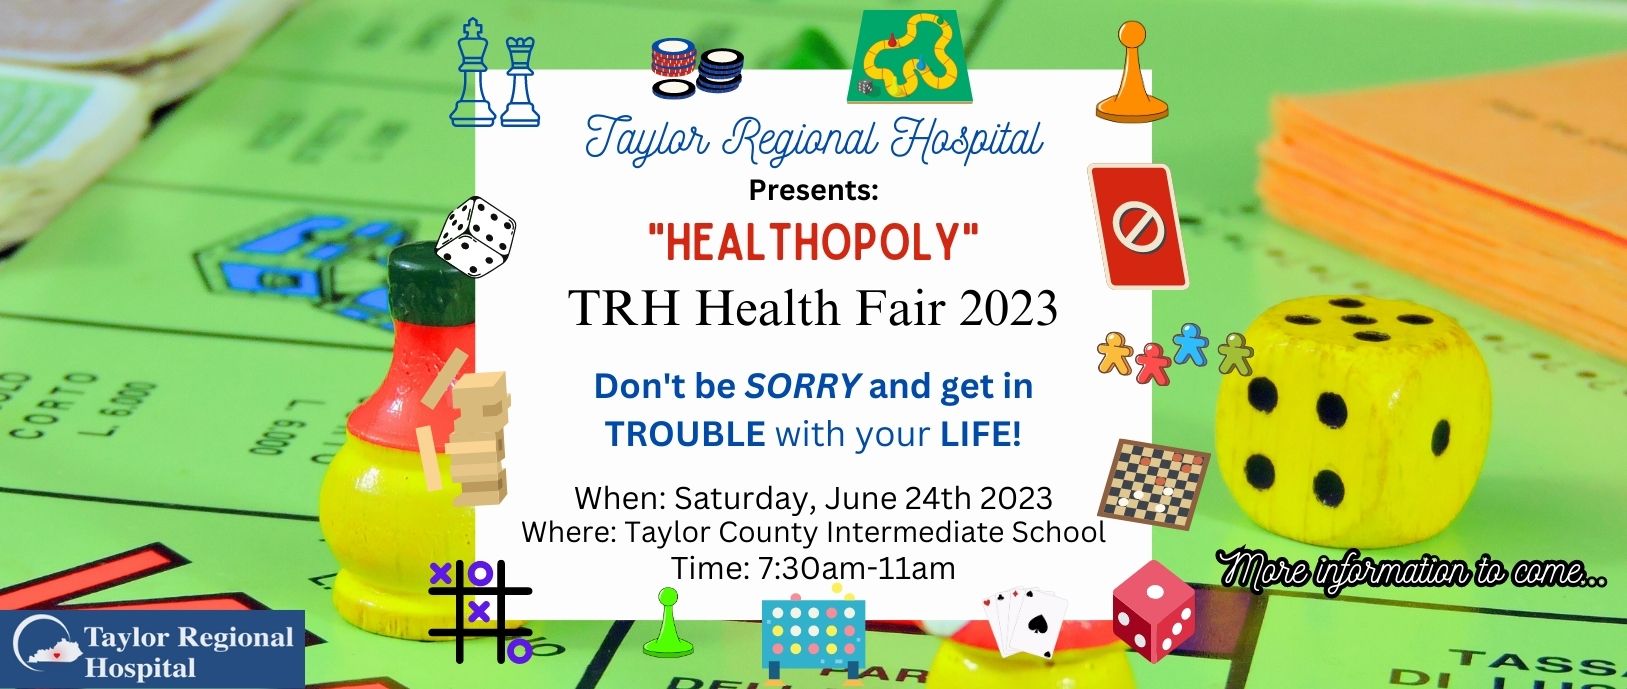 Taylor Regional Hospital Presents: Healthopoly
TRH Health Fair 2023

Don't be Sorry and get in trouble with your life! 

When: Saturday, June 24th 2023
Where: Taylor County Intermediate School
Time: 7:30am-11am